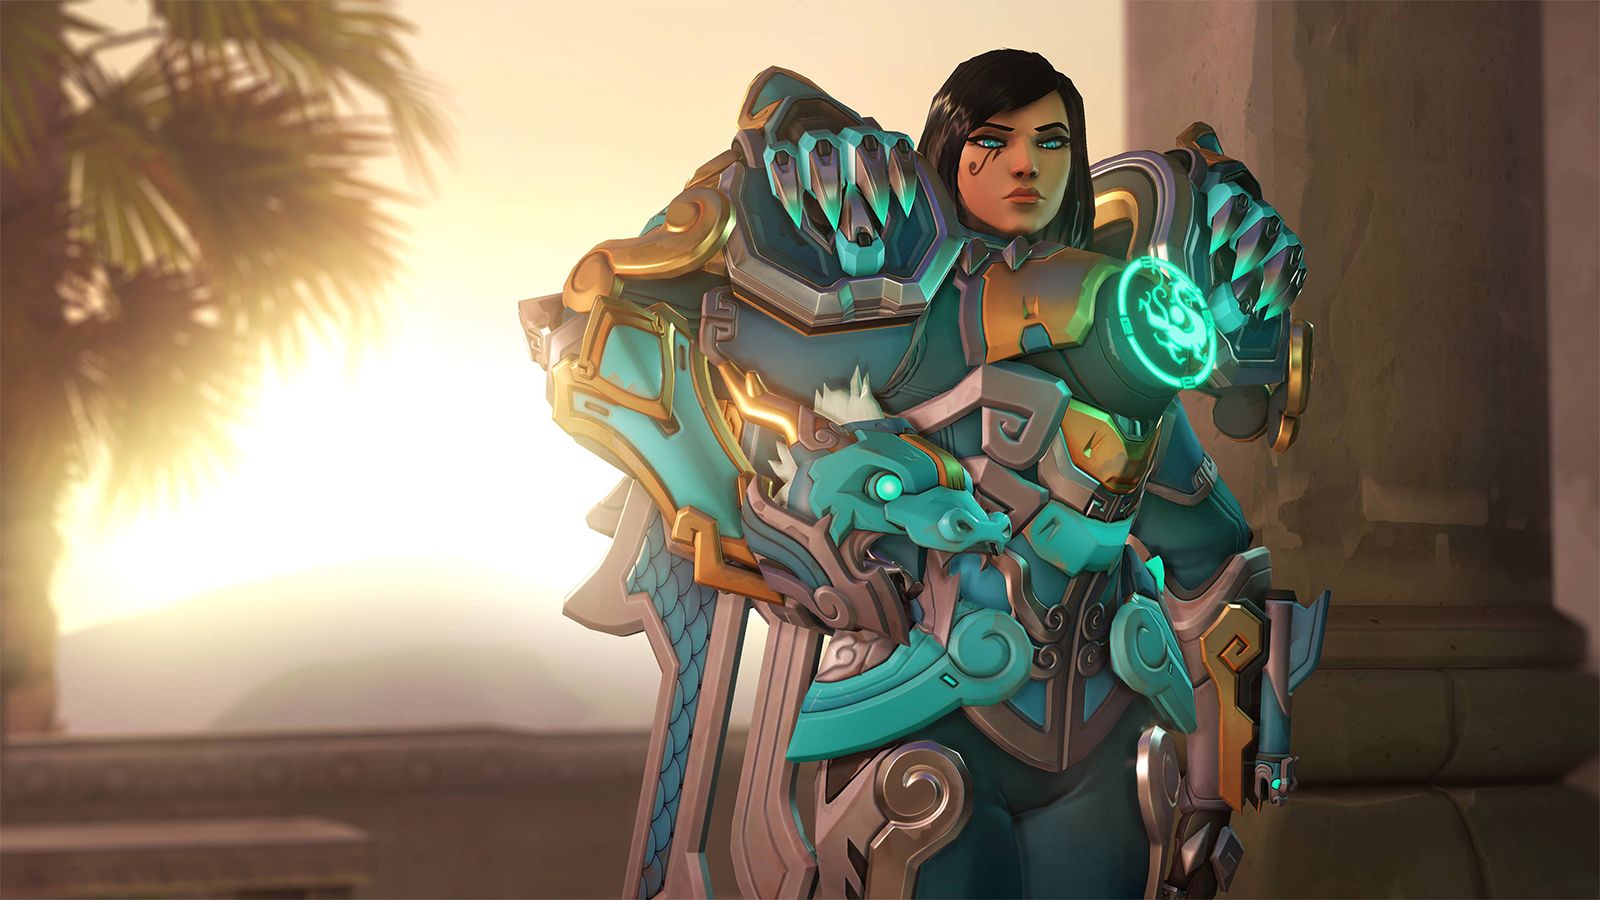 Does Pharah need another buff in Overwatch?